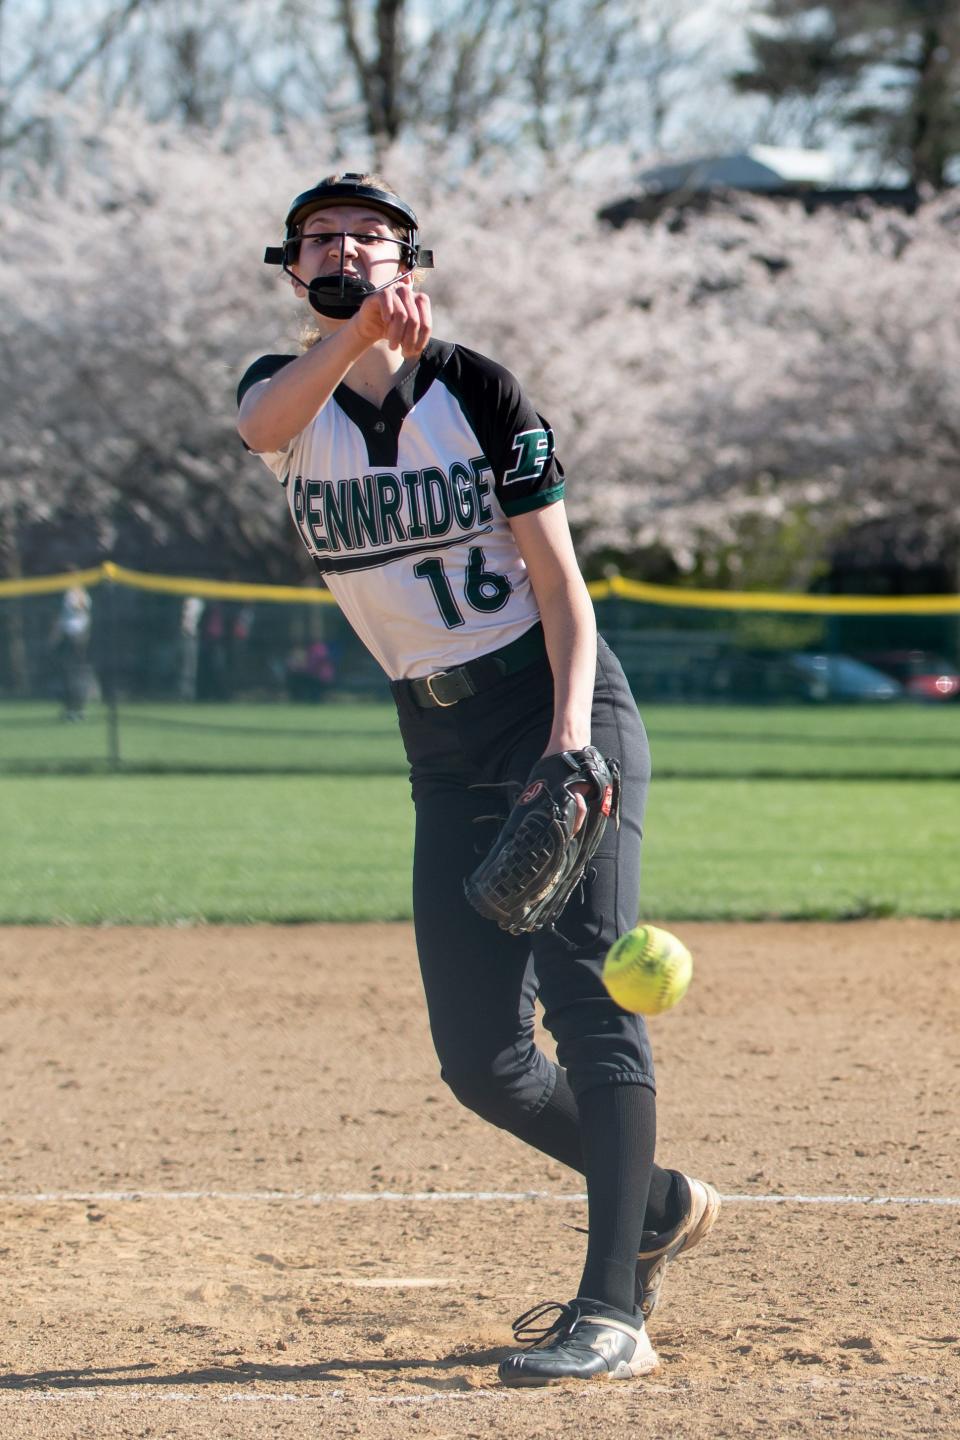 Pennridge's Averi Dockery pitches during a softball game against Central Bucks West, on Tuesday, April 12, 2022, at Central Bucks High School West in Doyletown Borough. The Rams shutout the Bucks 2-0.